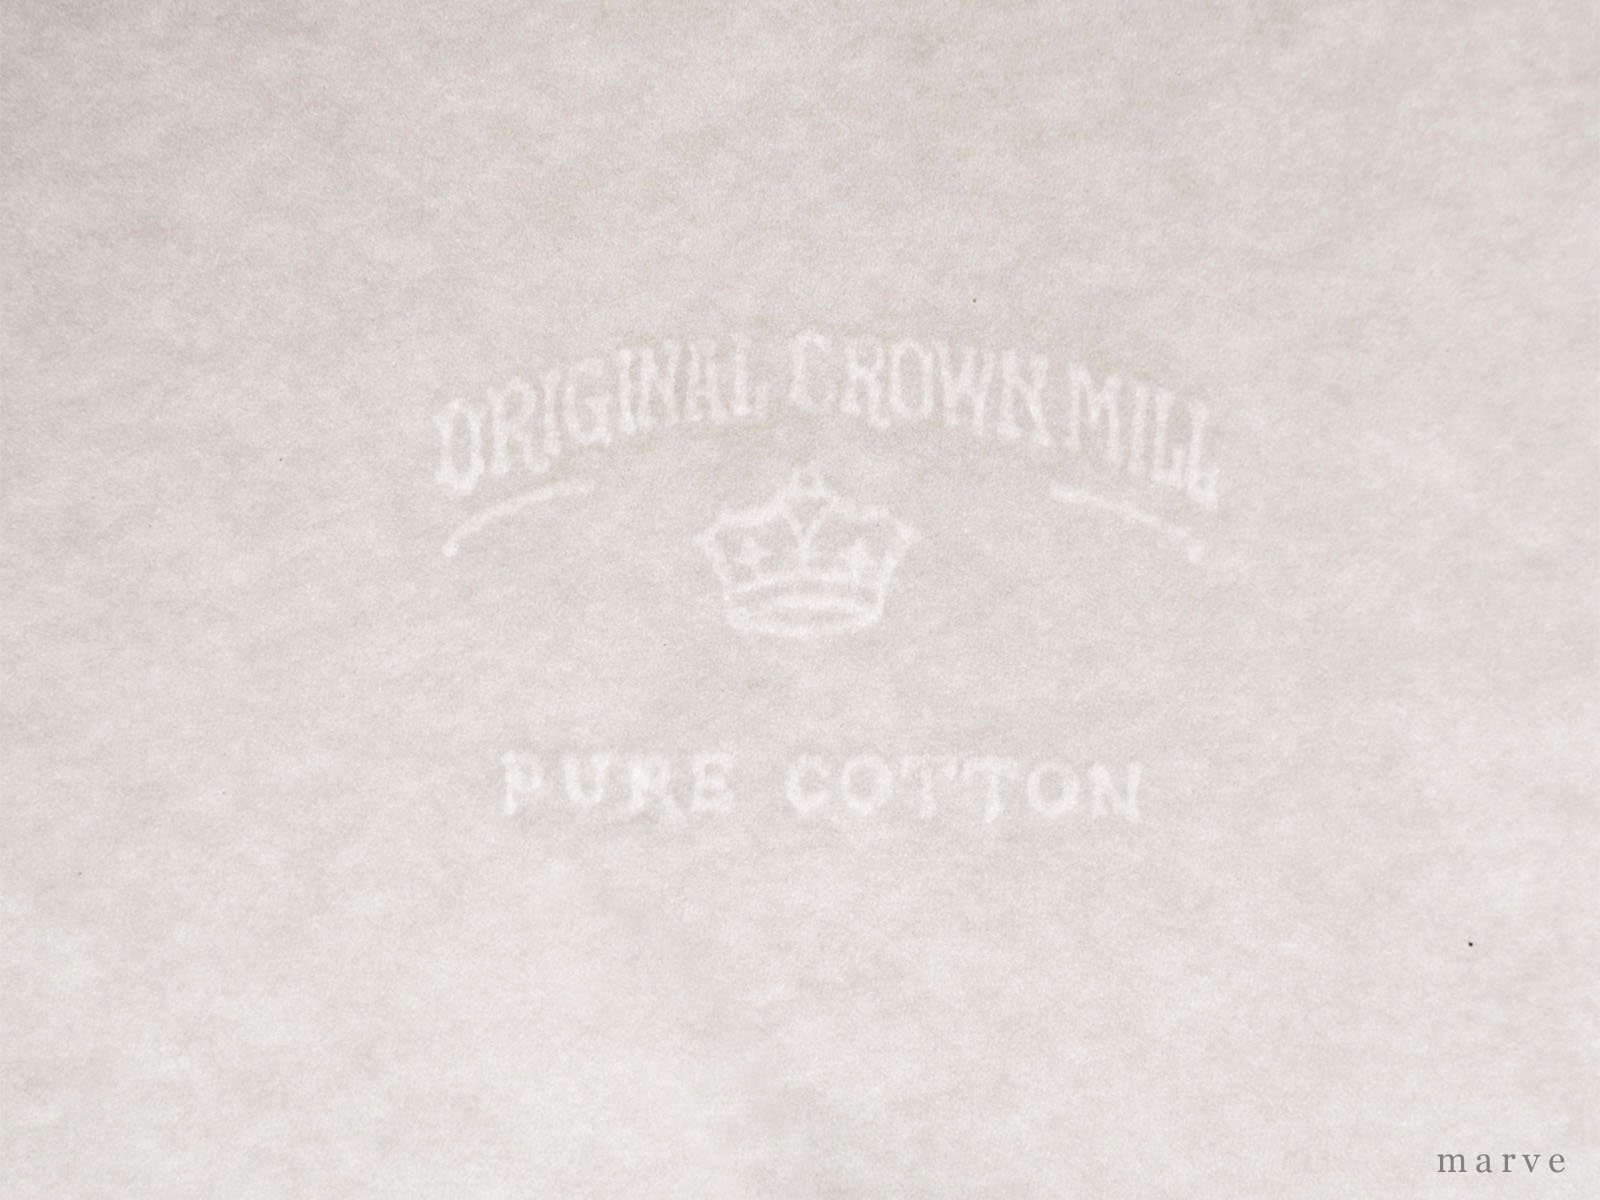 ORIGINAL CROWN MILL　ピュアコットンA4（50枚入）100gホワイト<img class='new_mark_img2' src='https://img.shop-pro.jp/img/new/icons1.gif' style='border:none;display:inline;margin:0px;padding:0px;width:auto;' />